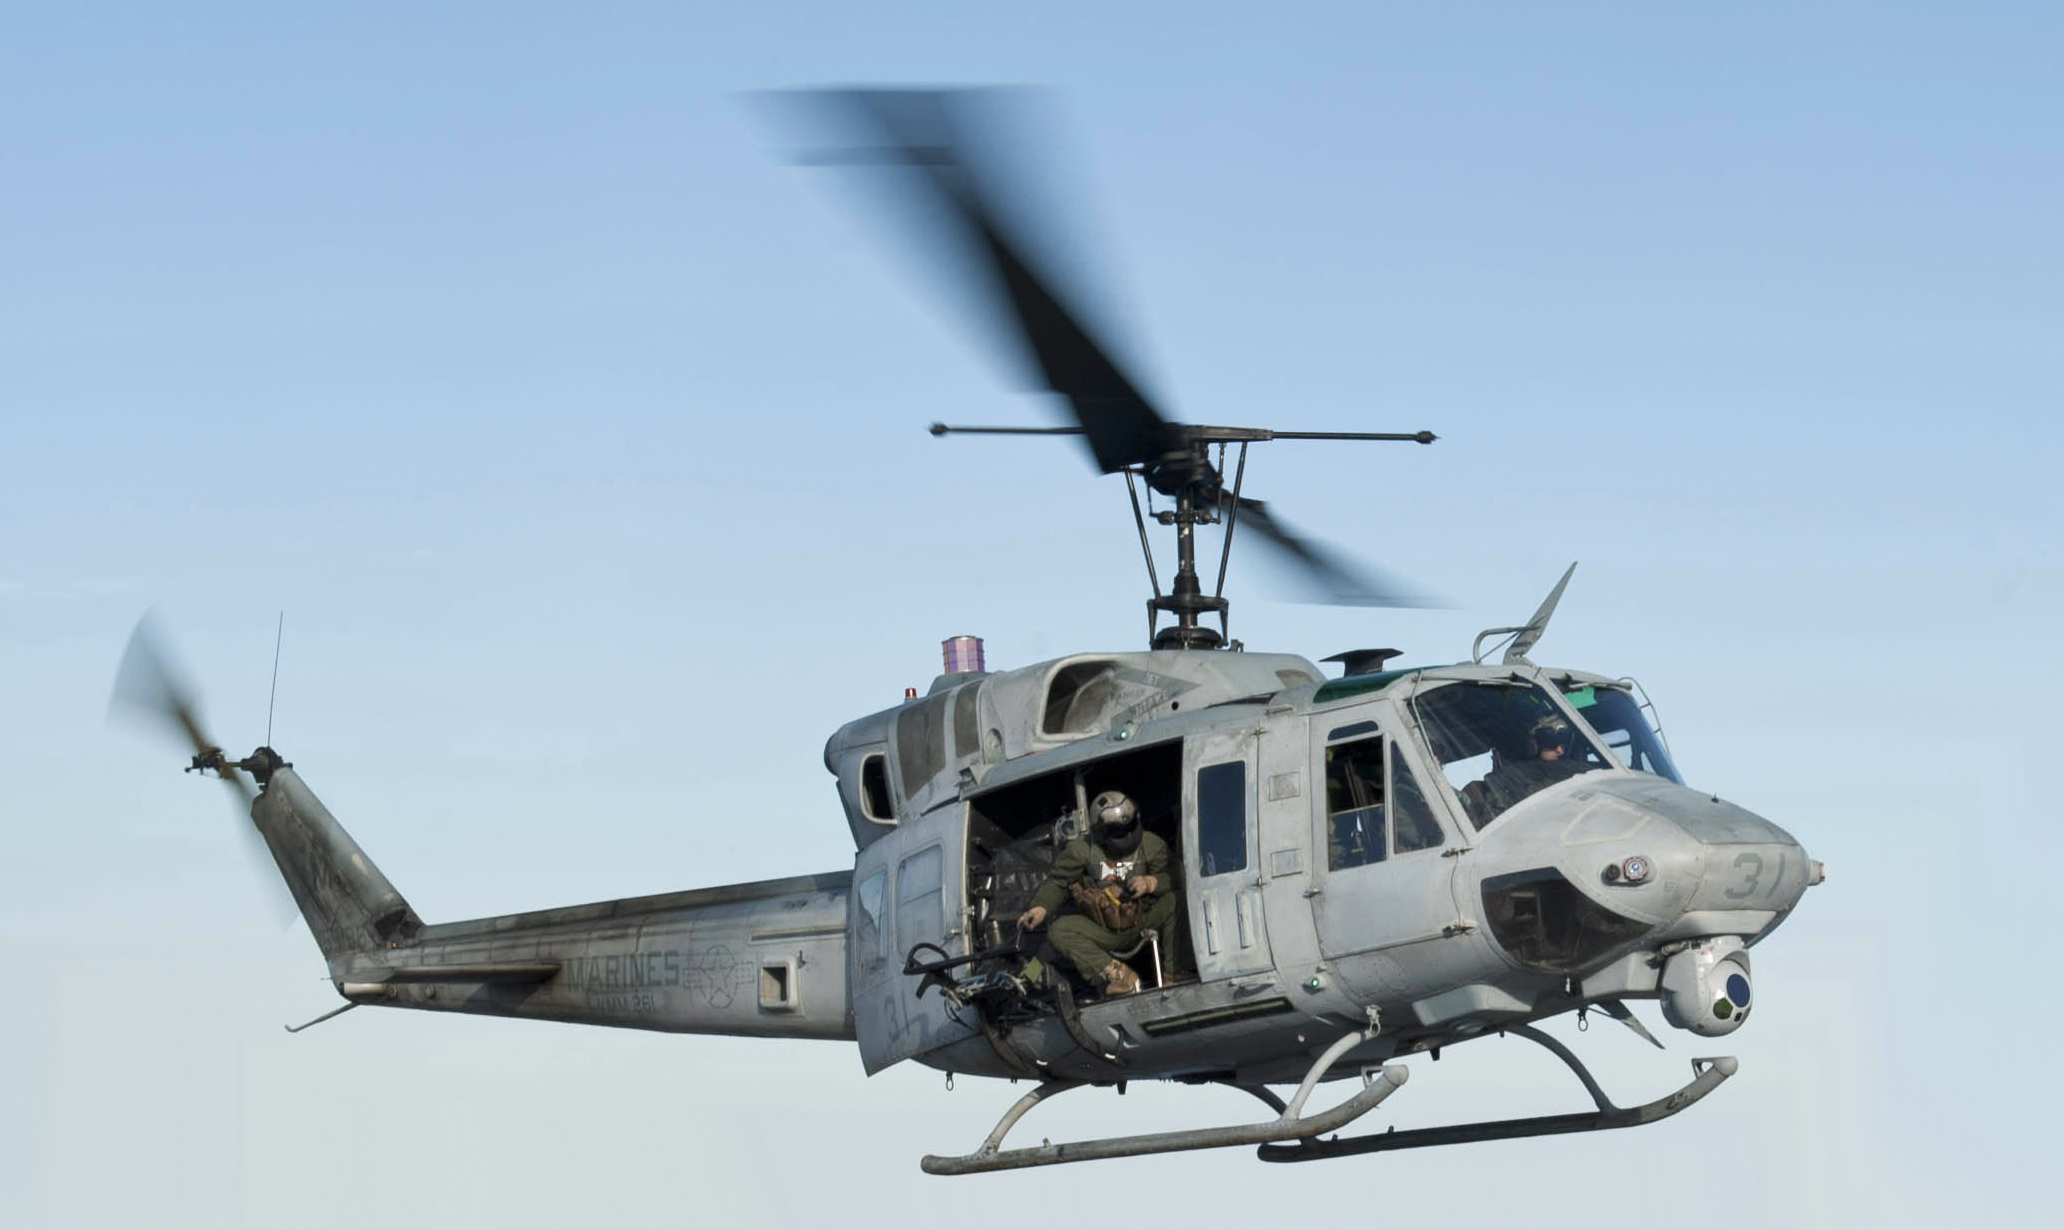 120131-N-XK513-120_Sailor_directs_a_UH-1N_Huey_helicopter_from_%28VMM%29_261_%28cropped%29.jpg